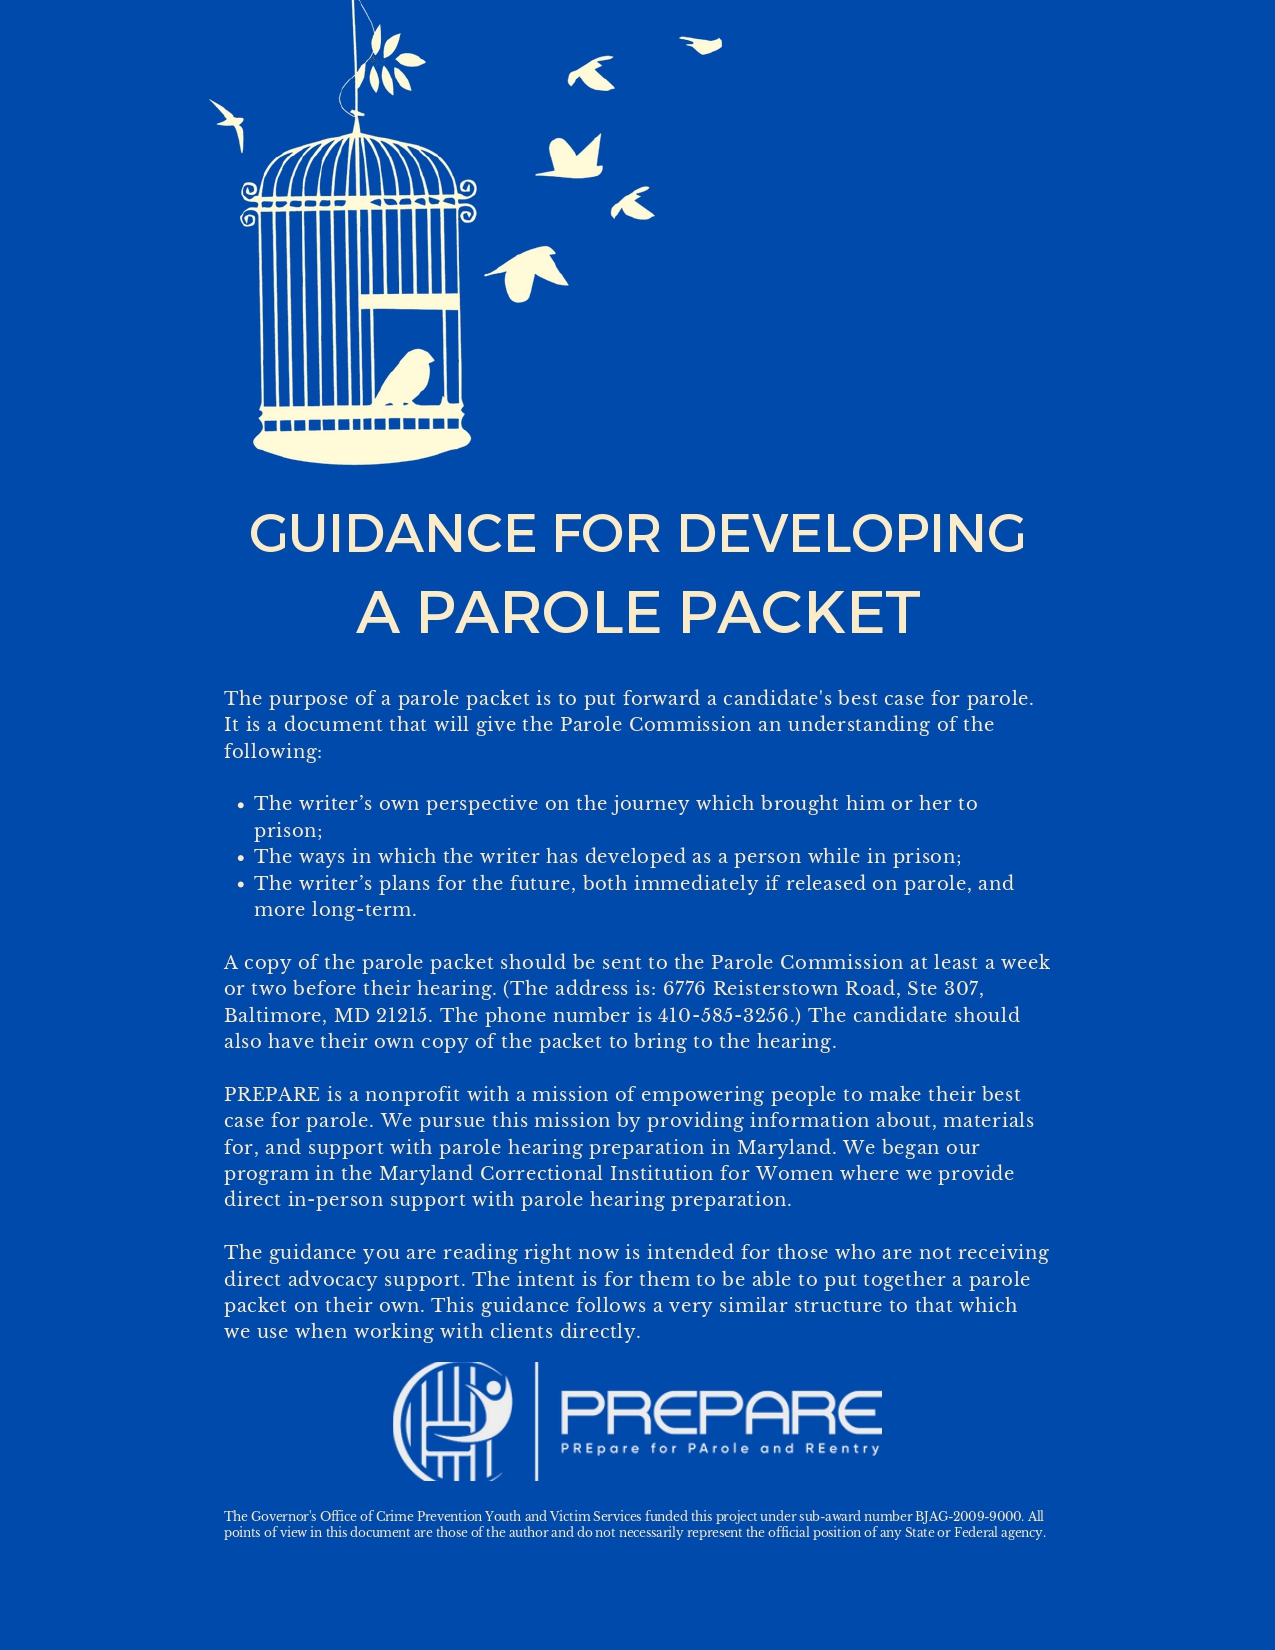 Guidance for developing a parole packet